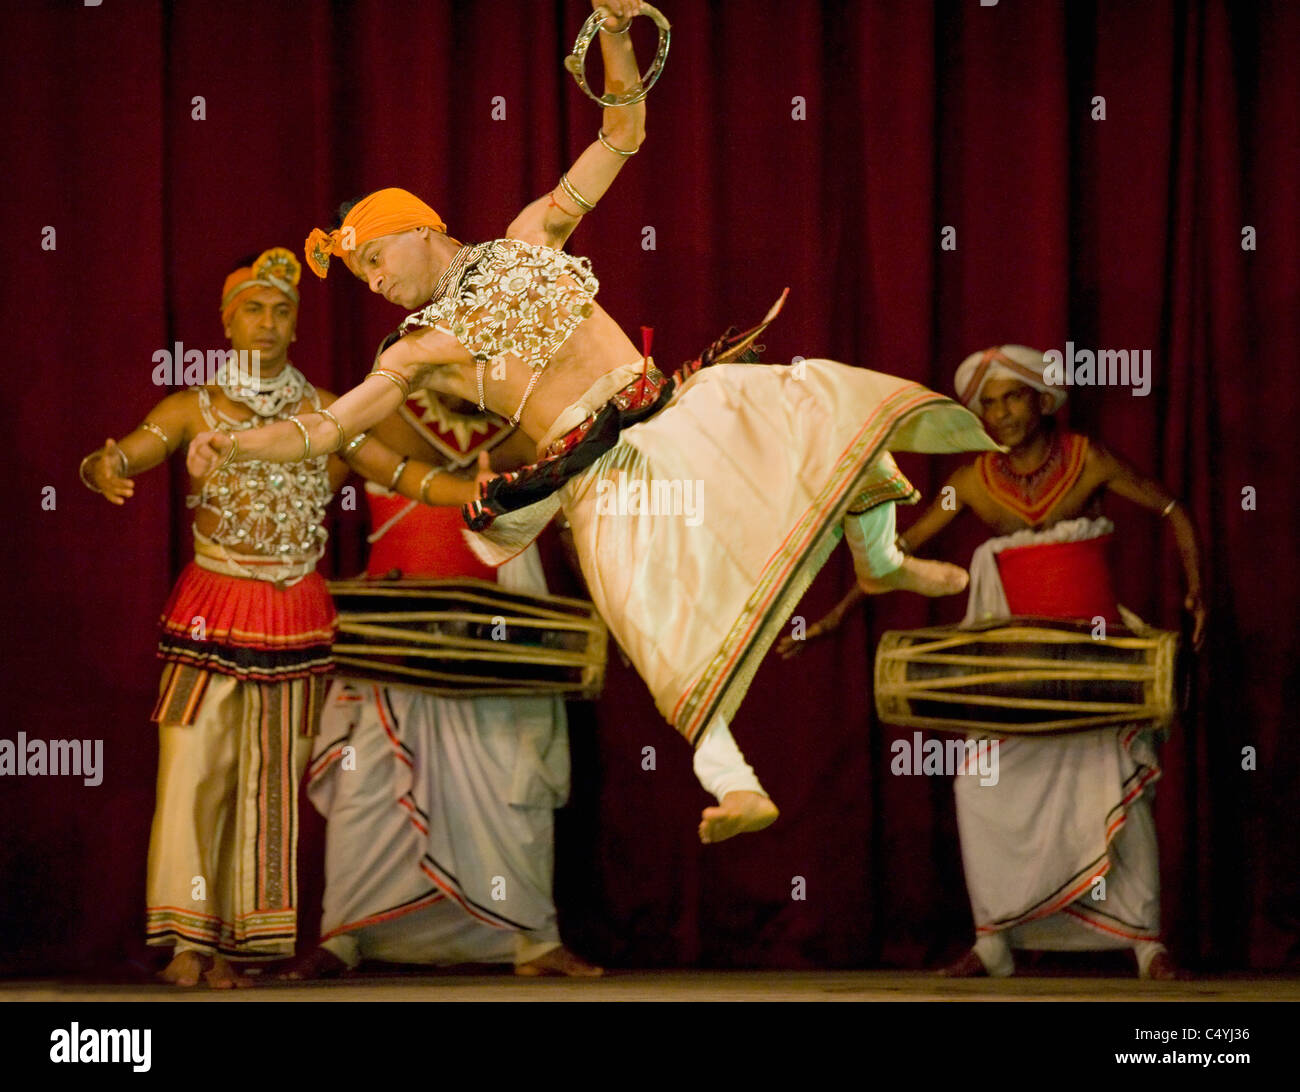 Traditional Dance and Drumming Performance, Cultural Show, Kandy, Sri Lanka Stock Photo